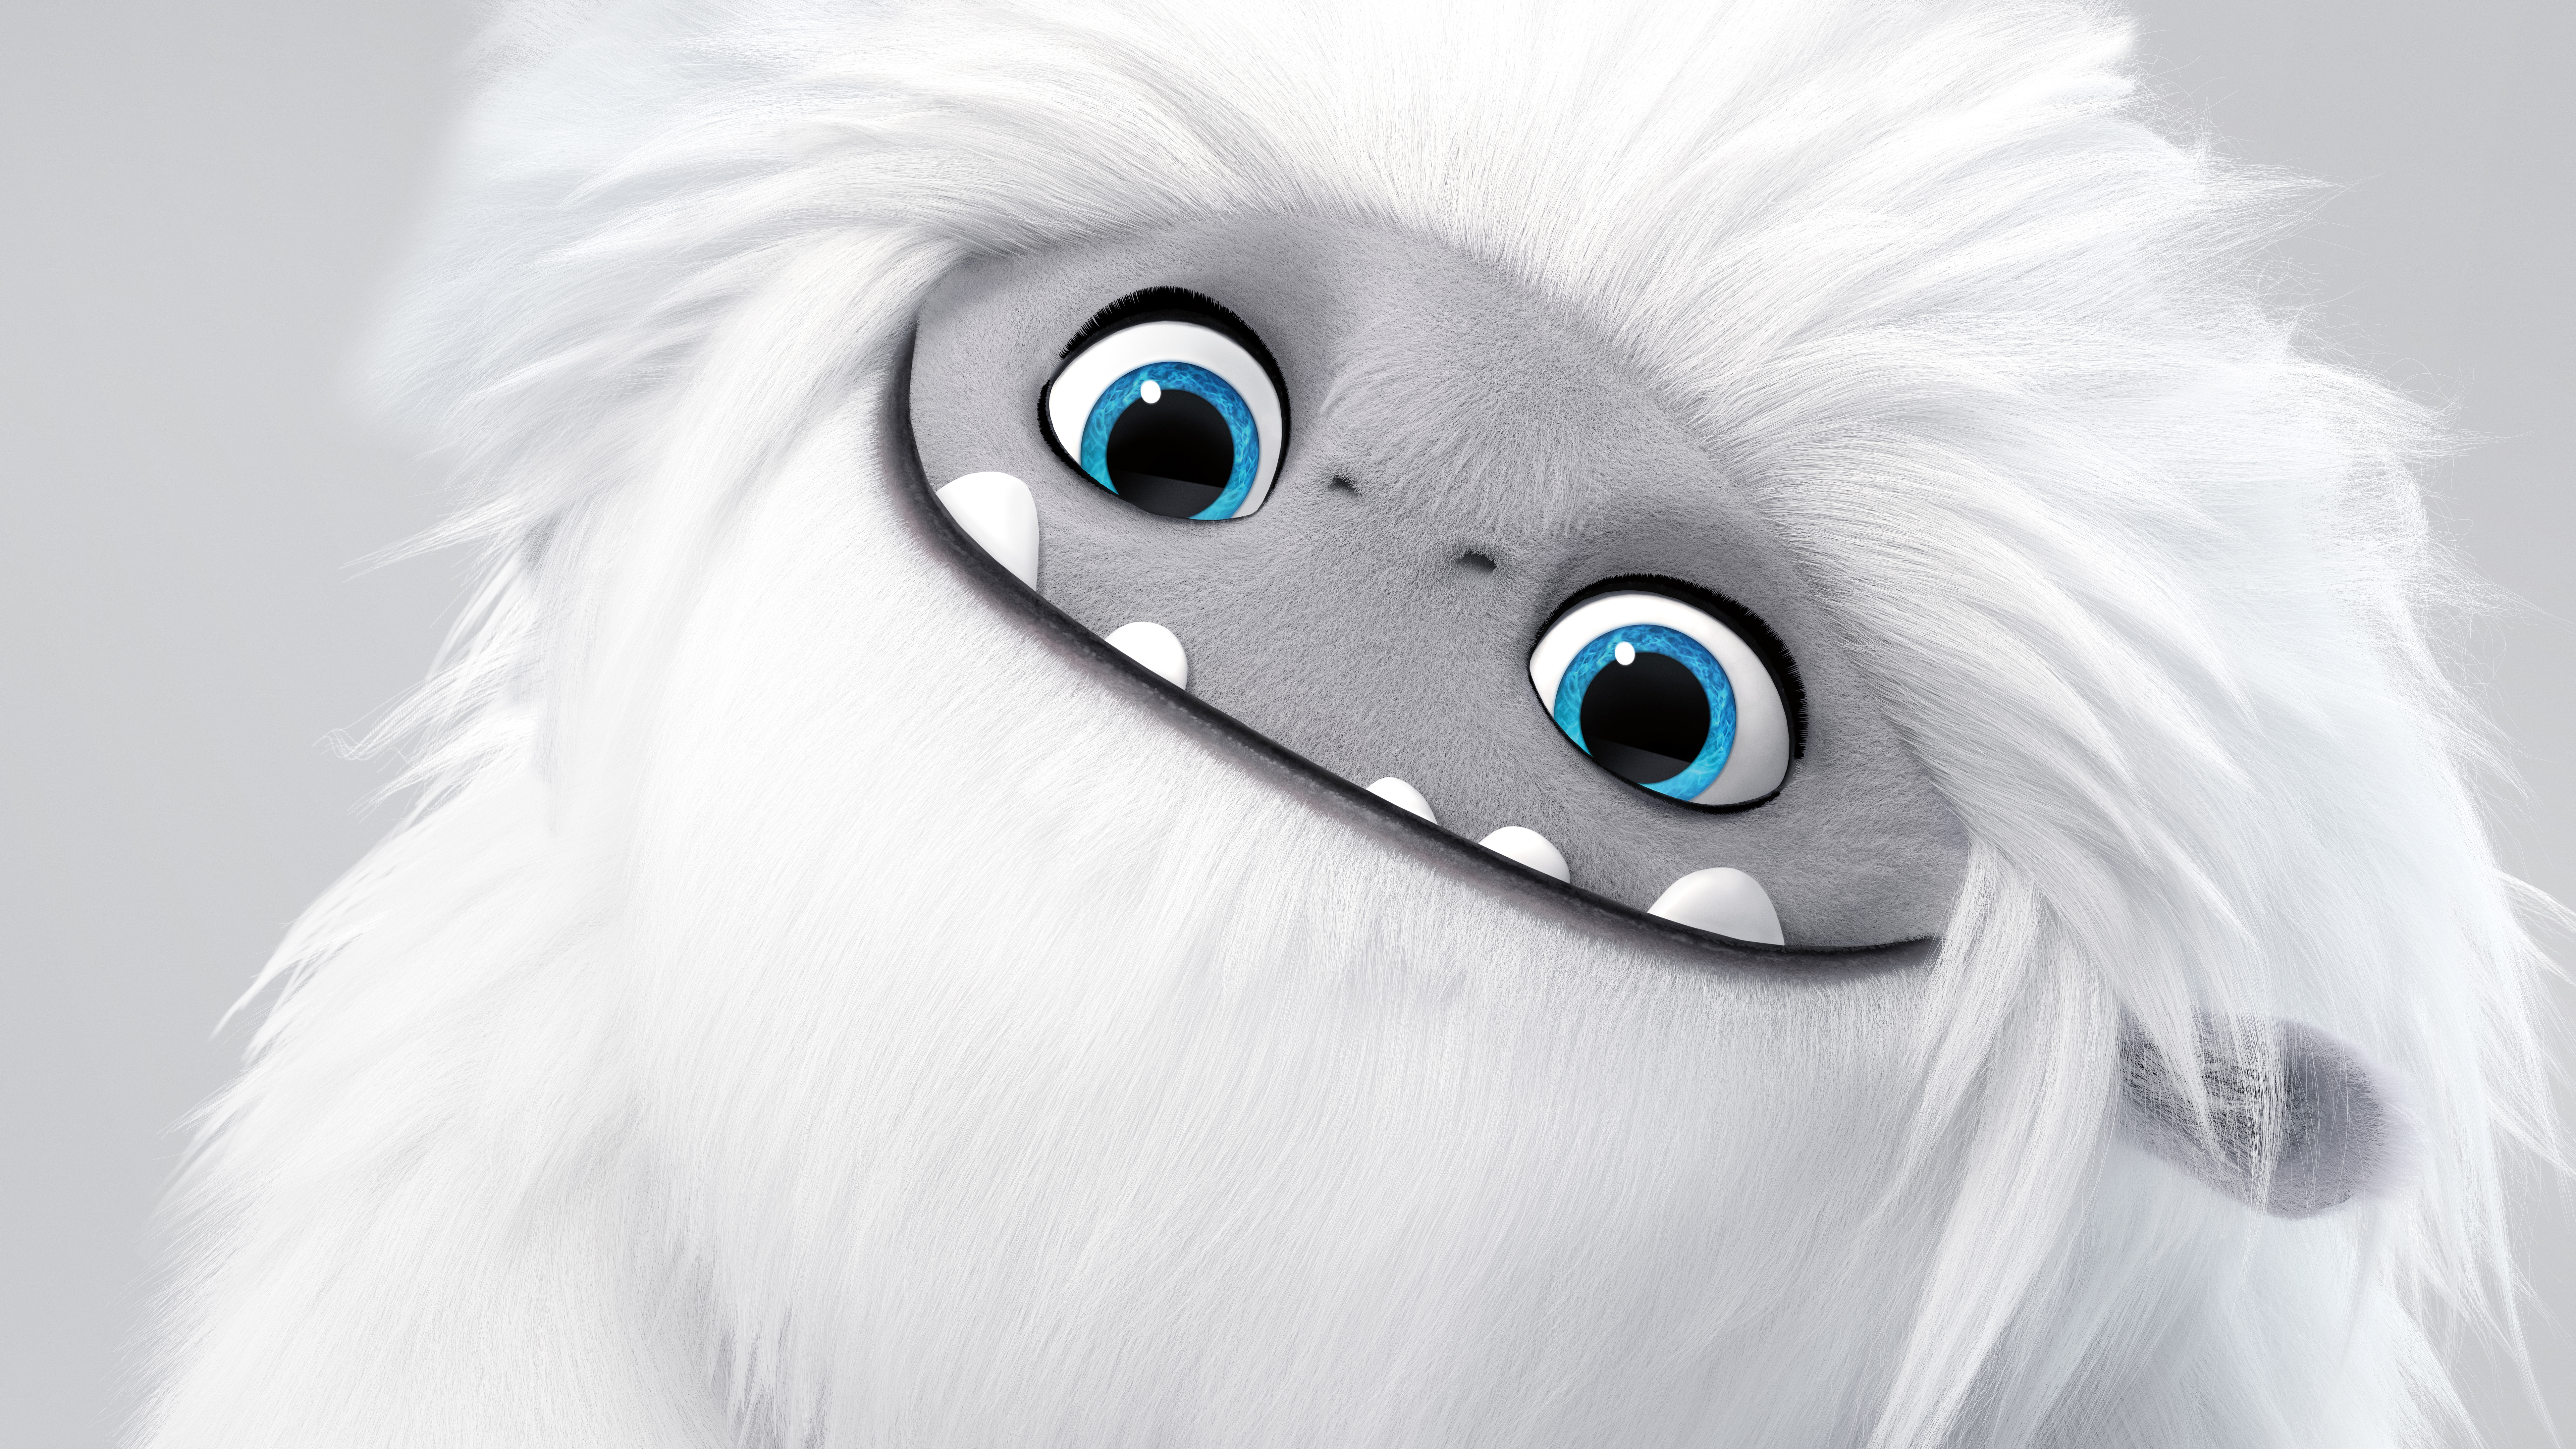 Movie Abominable HD Wallpaper | Background Image